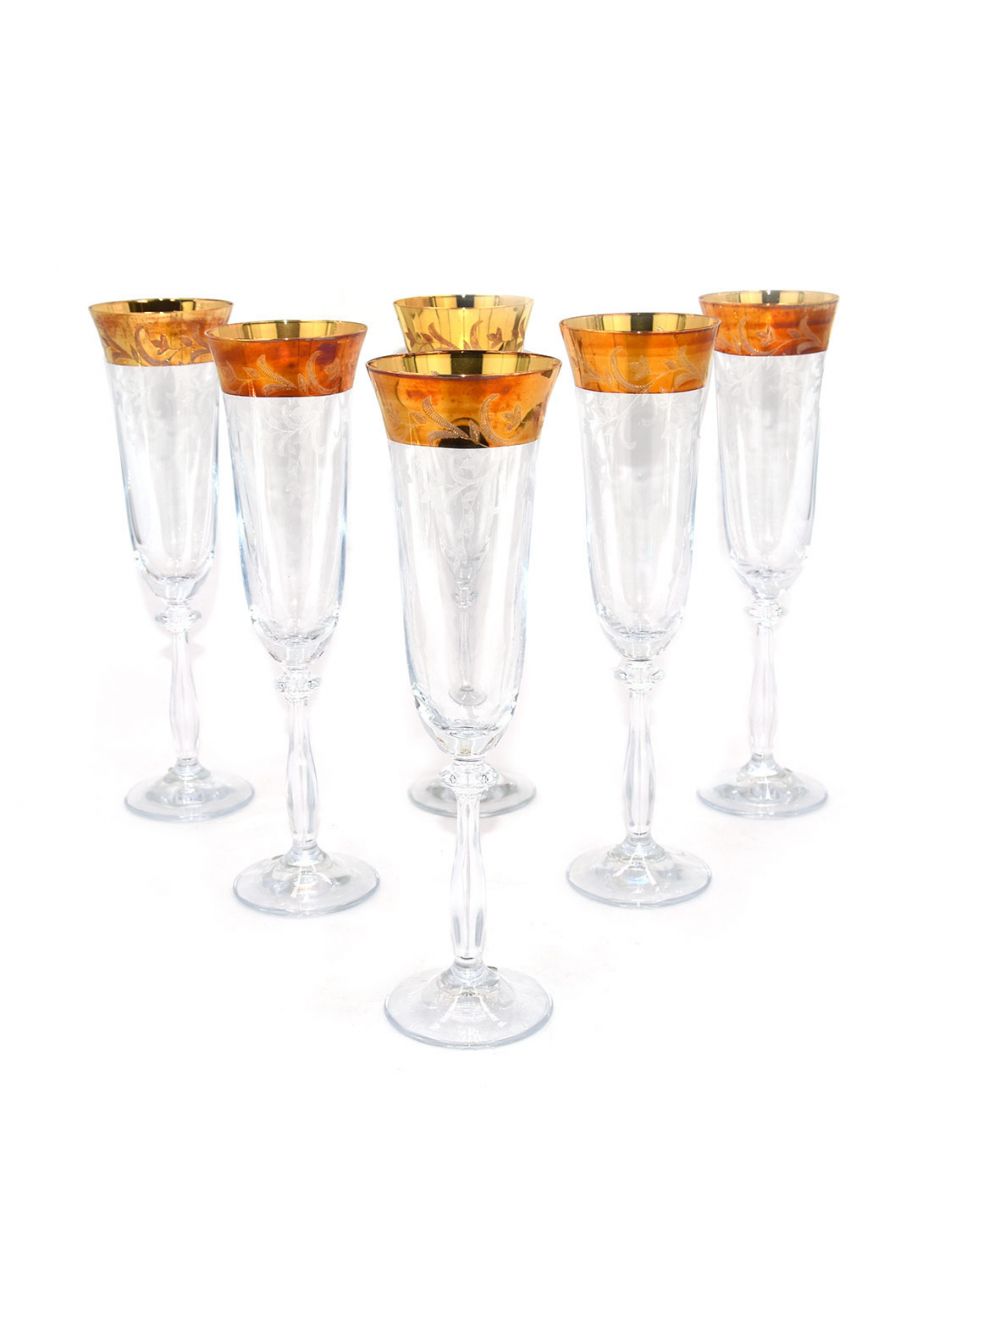 Bohemia 6 Pieces Gold Plated 190 ml Flute Glass